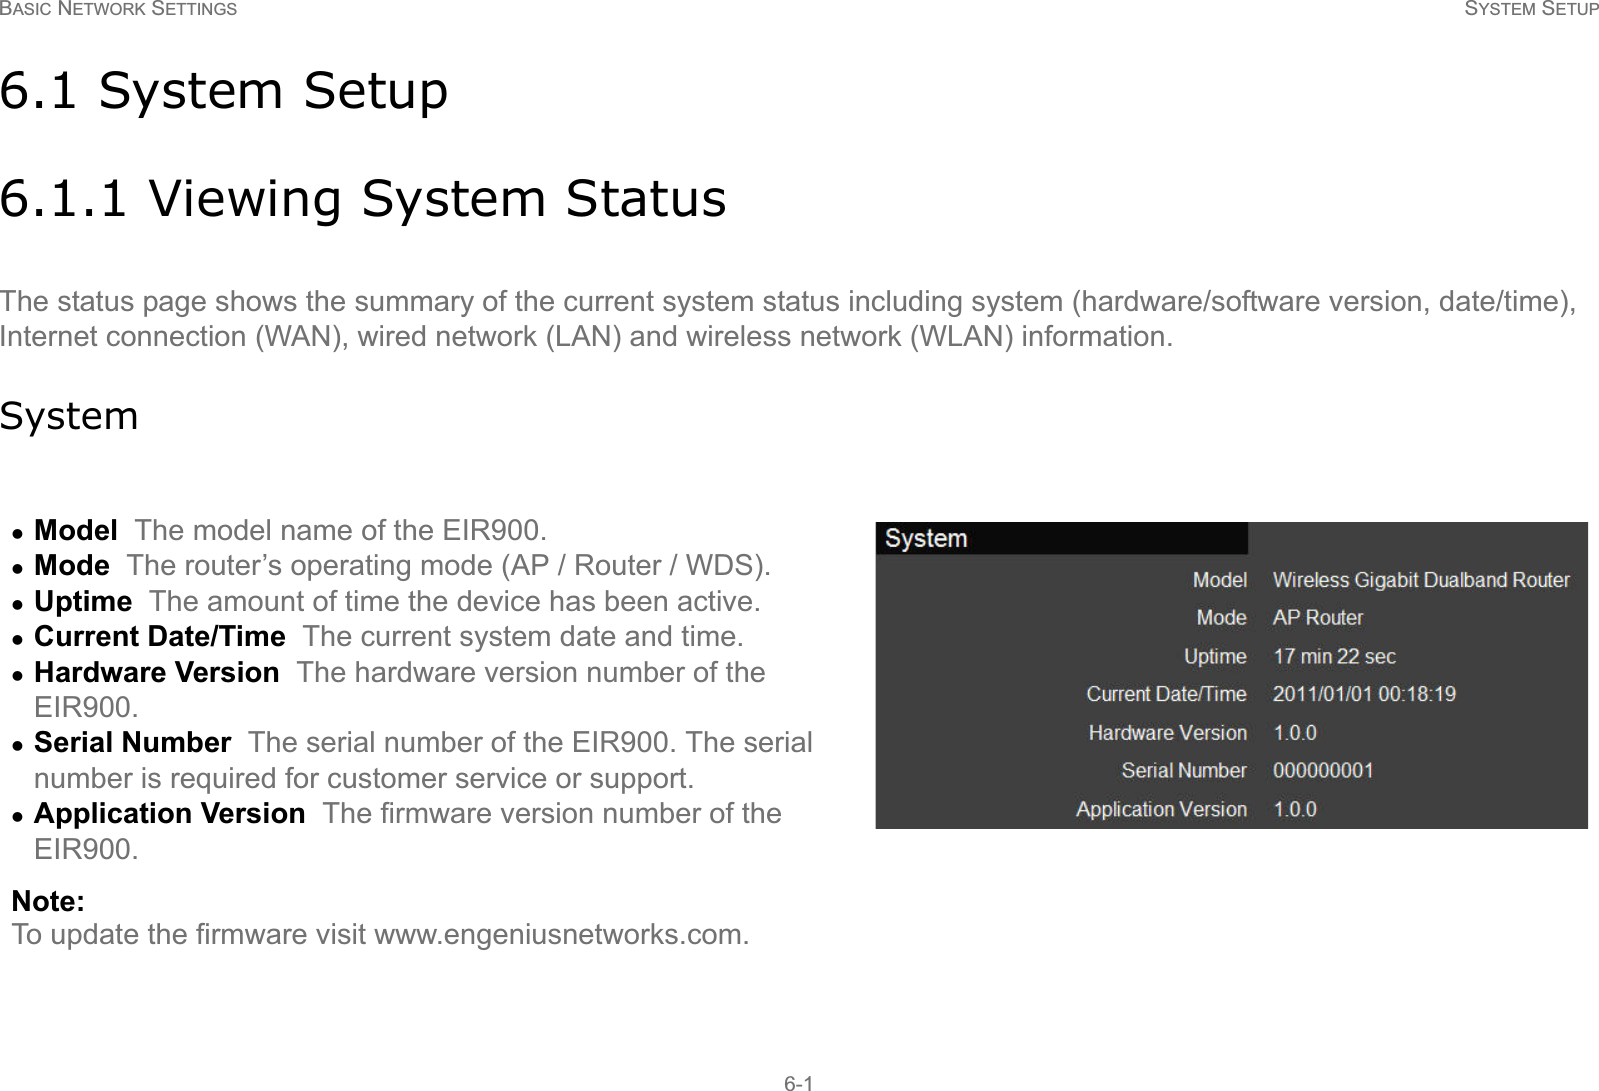 BASIC NETWORK SETTINGS SYSTEM SETUP6-16.1 System Setup6.1.1 Viewing System StatusThe status page shows the summary of the current system status including system (hardware/software version, date/time), Internet connection (WAN), wired network (LAN) and wireless network (WLAN) information.SystemzModel  The model name of the EIR900.zMode  The router’s operating mode (AP / Router / WDS).zUptime  The amount of time the device has been active.zCurrent Date/Time  The current system date and time.zHardware Version  The hardware version number of the EIR900.zSerial Number  The serial number of the EIR900. The serial number is required for customer service or support.zApplication Version  The firmware version number of the  EIR900.Note:To update the firmware visit www.engeniusnetworks.com.